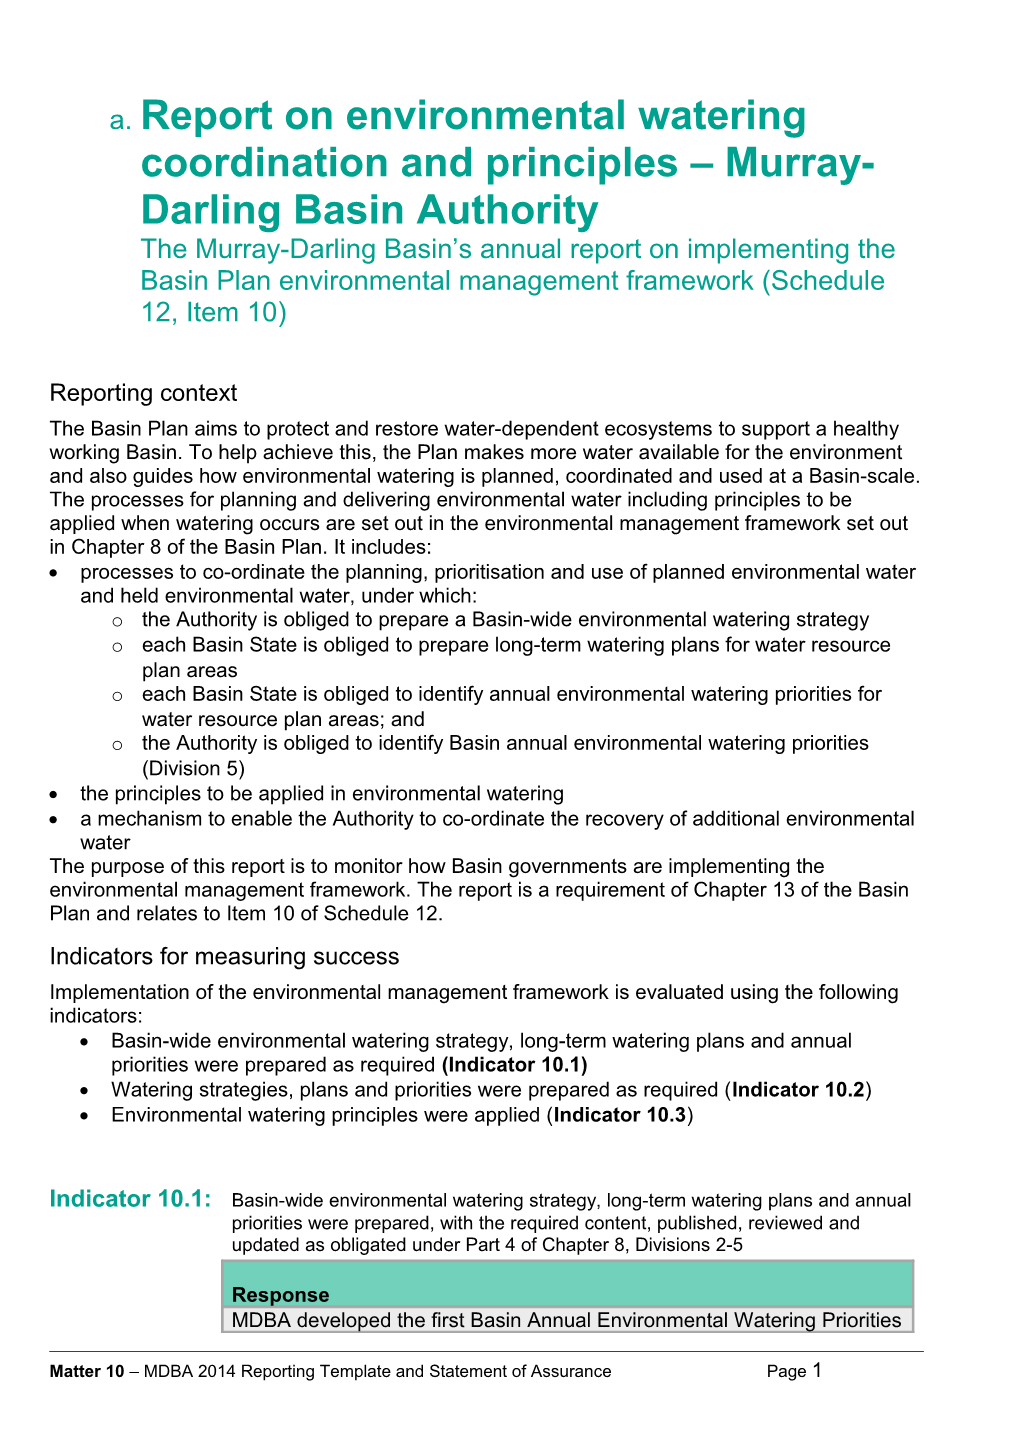 Report on Environmental Watering Coordination and Principles Murray-Darling Basin Authoritythe